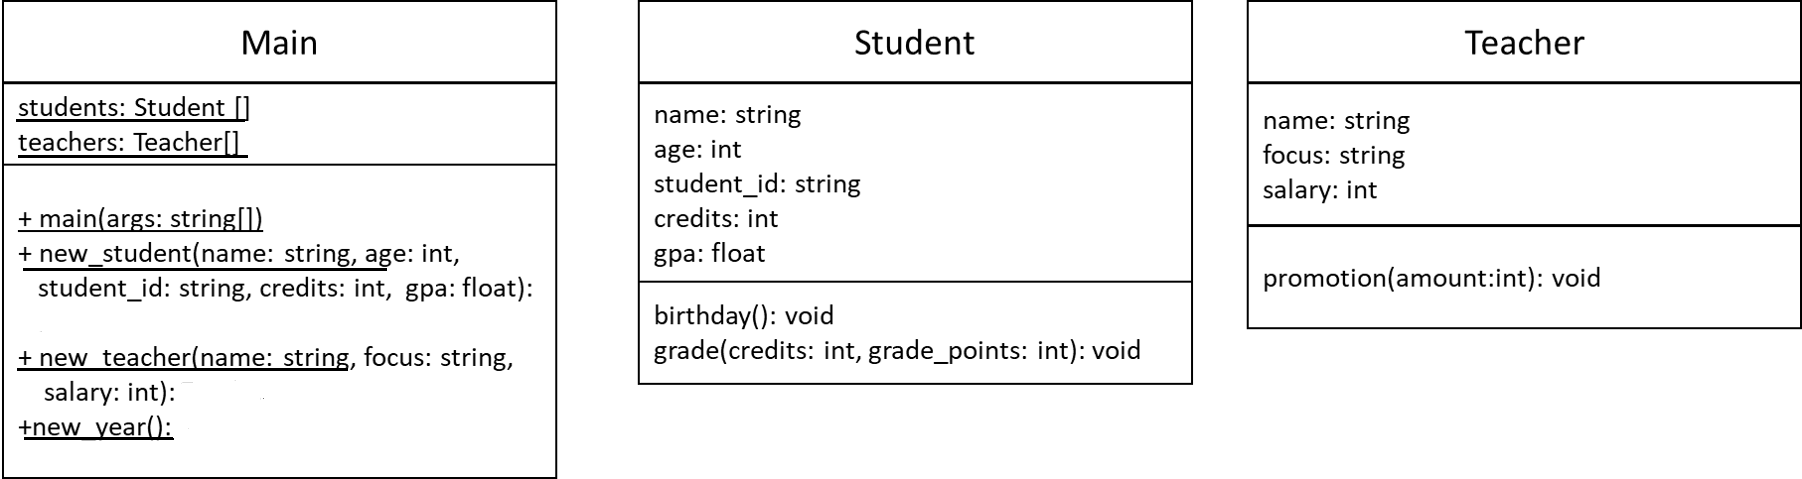 UML Class Diagram showing Main, Student, and Teacher Classes, Attributes, and Methods